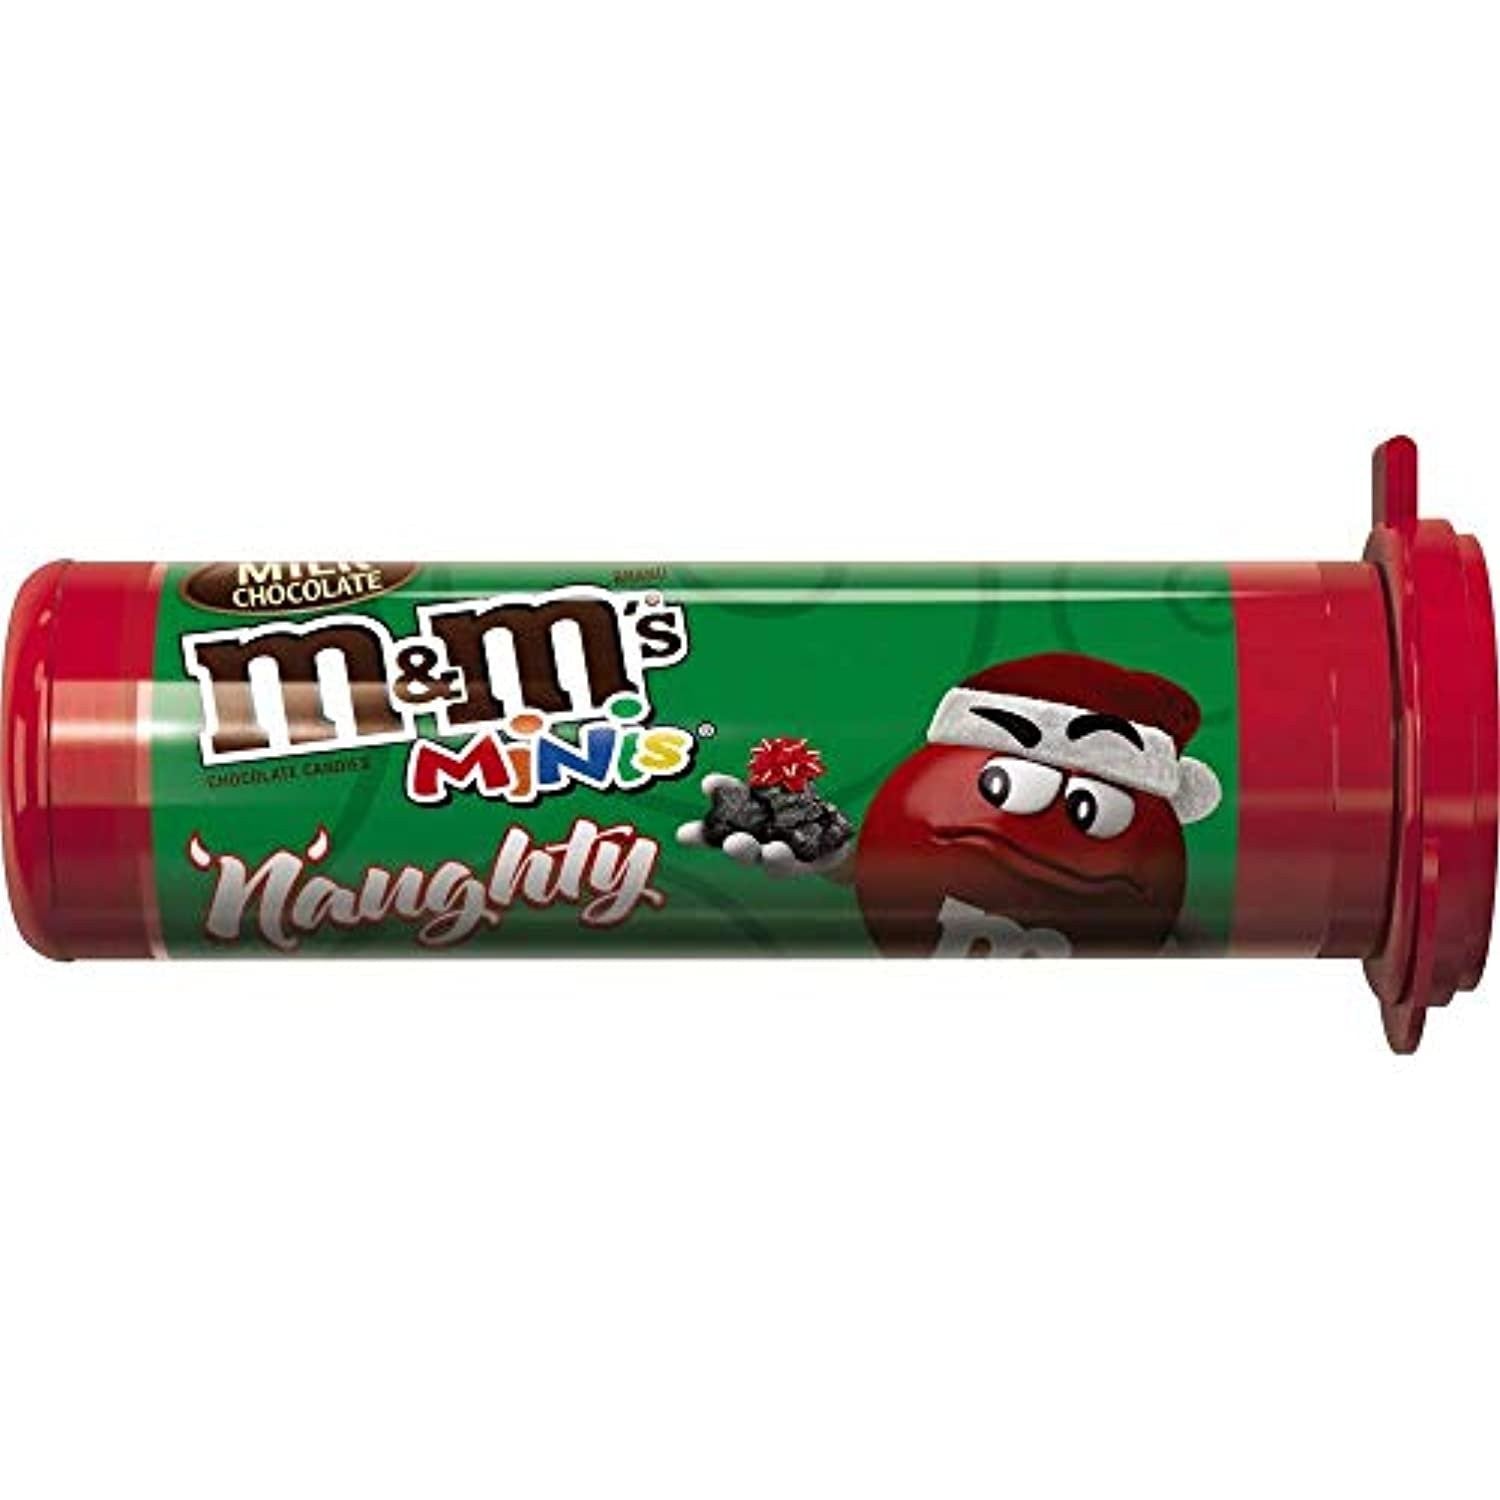 Bulk M&M’S MINIS Milk Chocolate Candy, 1.08-Ounce Tubes (Pack of 24), 2 pack